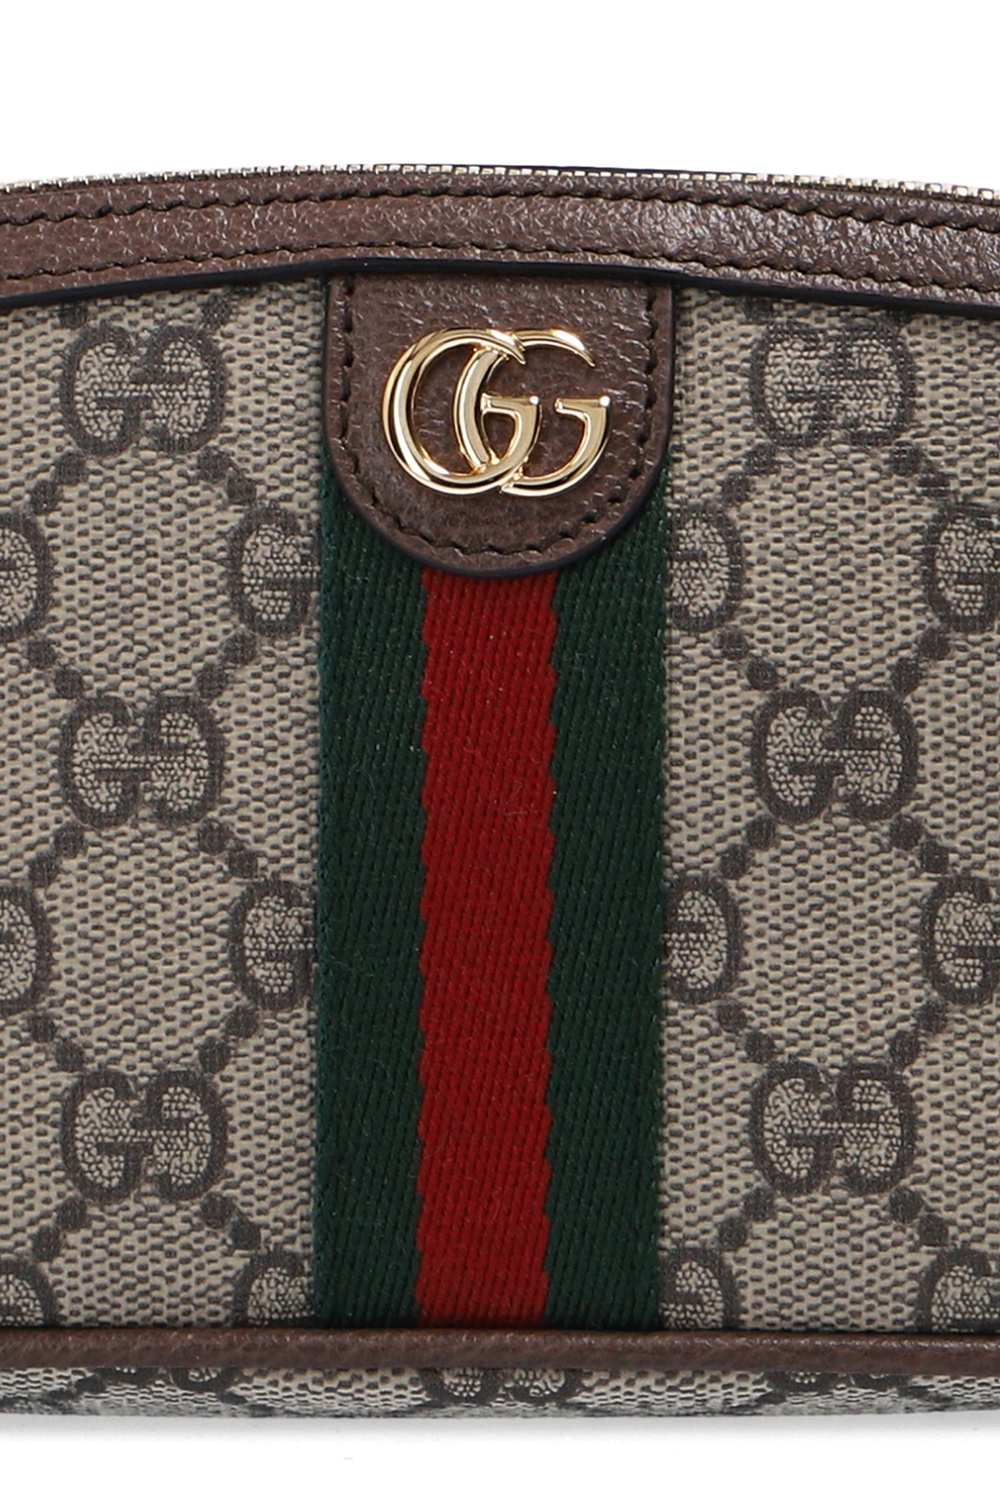 Download The Updated Version Of The App Gucci Gov Gb